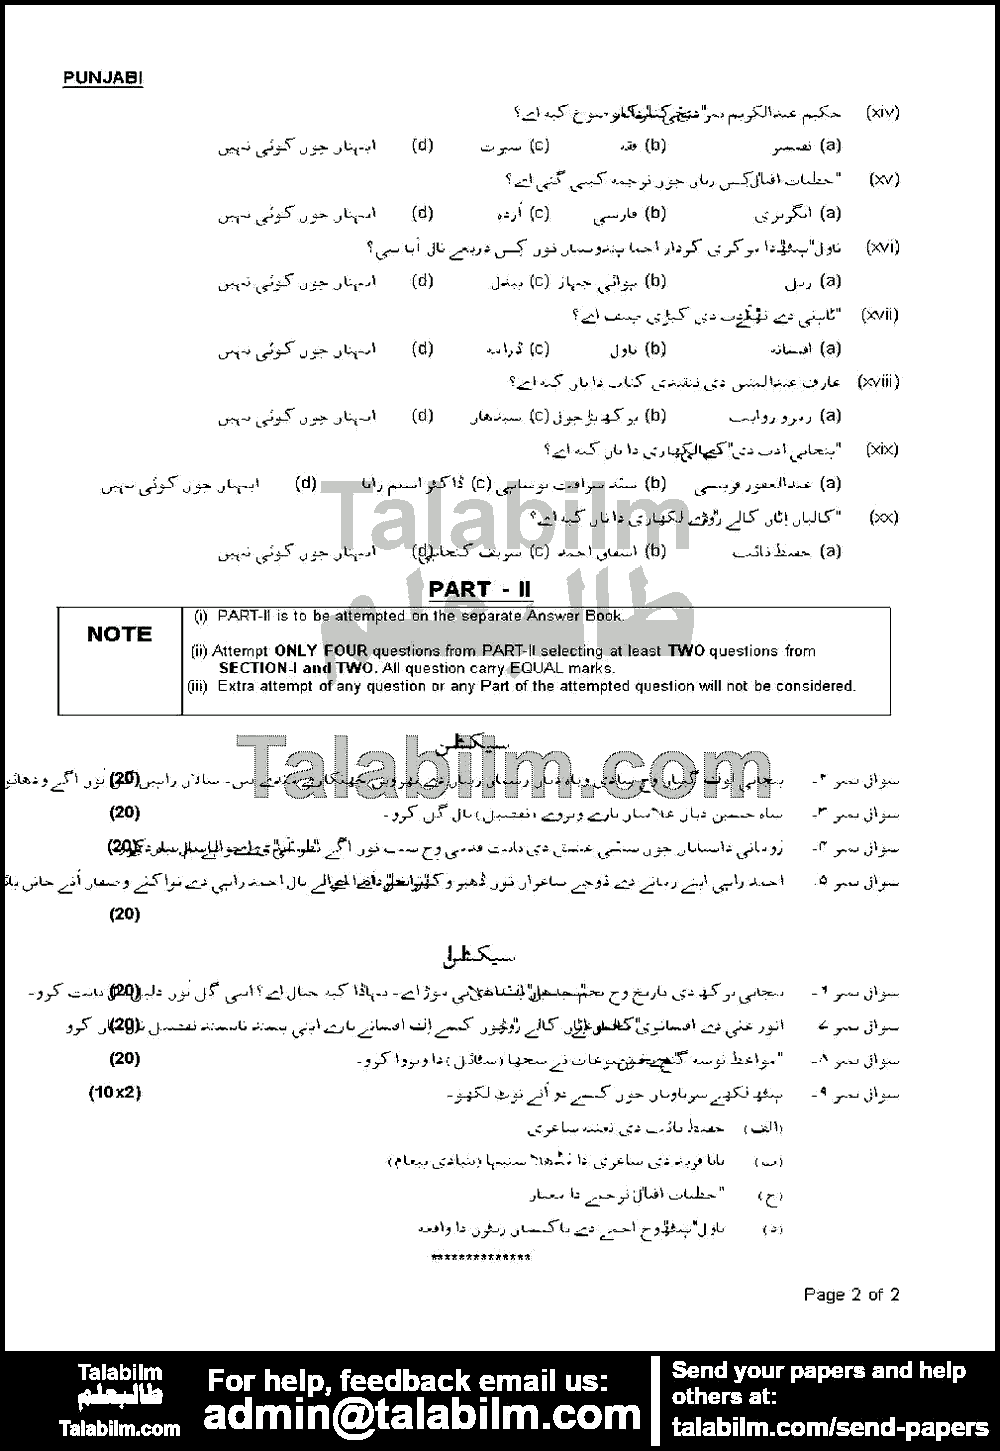 Punjabi 0 past paper for 2009 Page No. 2